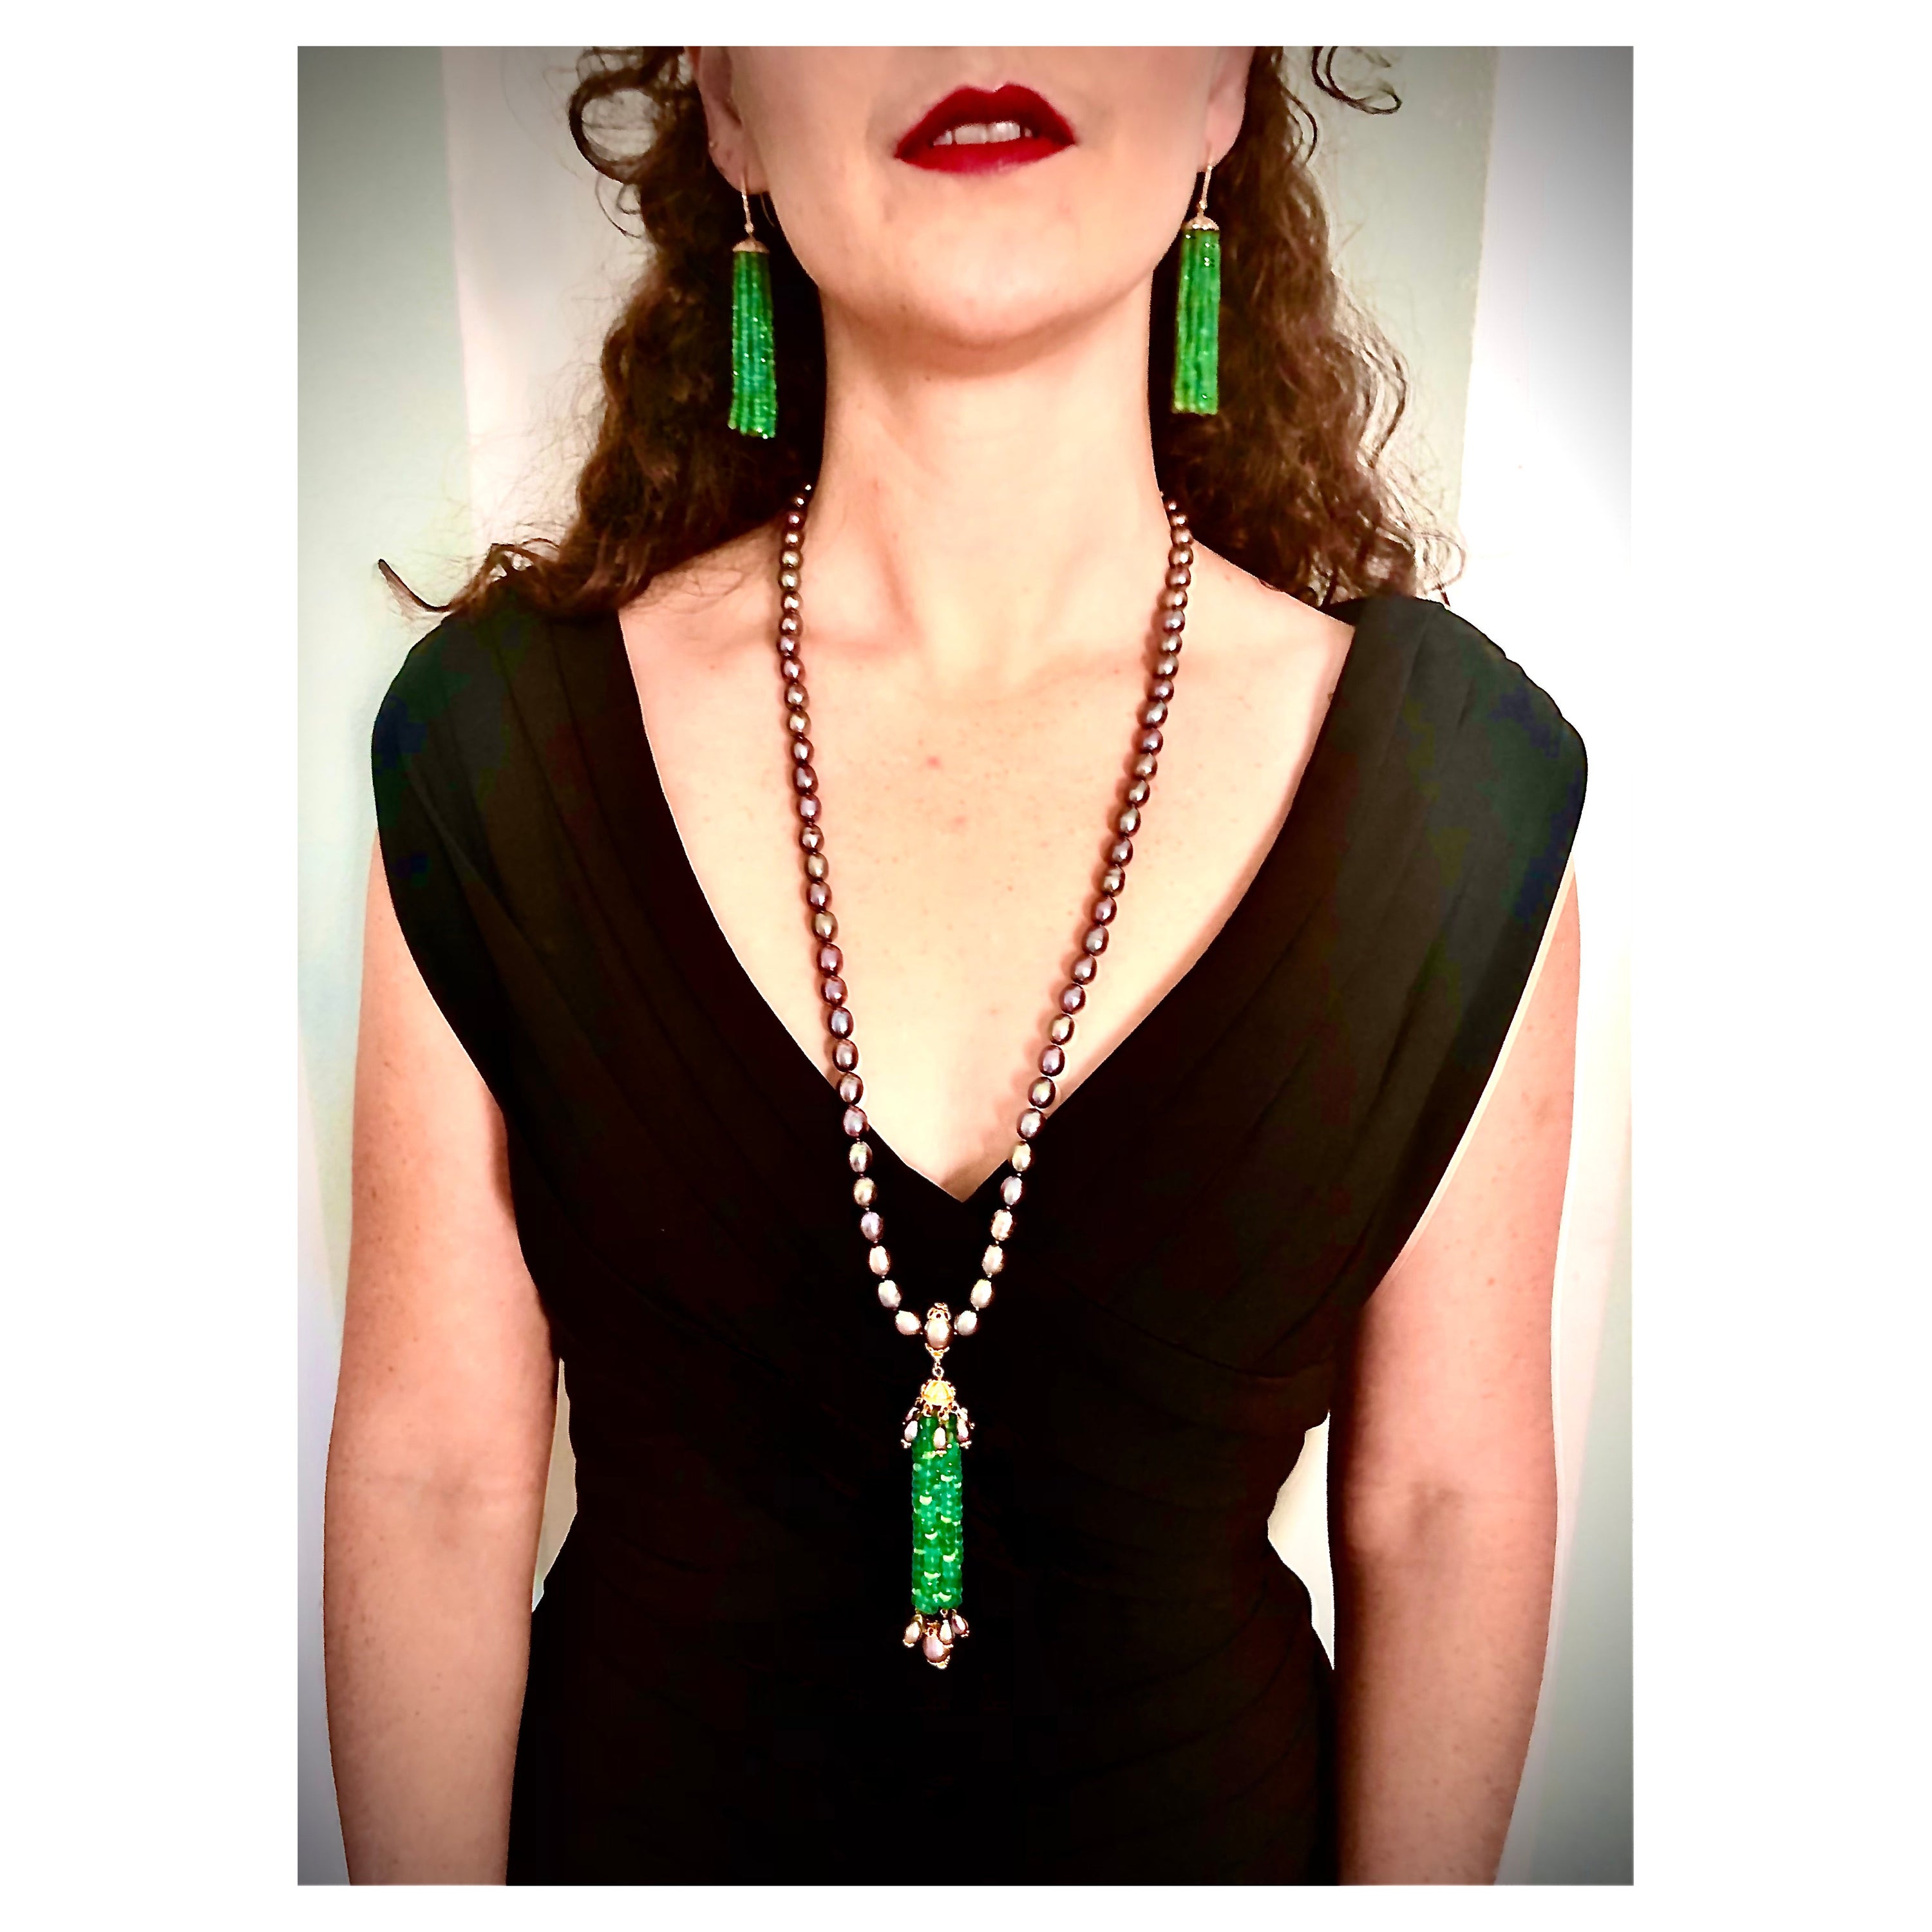 An elegant sautoir necklace consisting of a 24” rope of black freshwater oval pearls with an exquisite long tassel of well colored faceted emerald beads interspersed with faceted rock crystal beads. The tassel is gathered into an 18kt gold Mughal